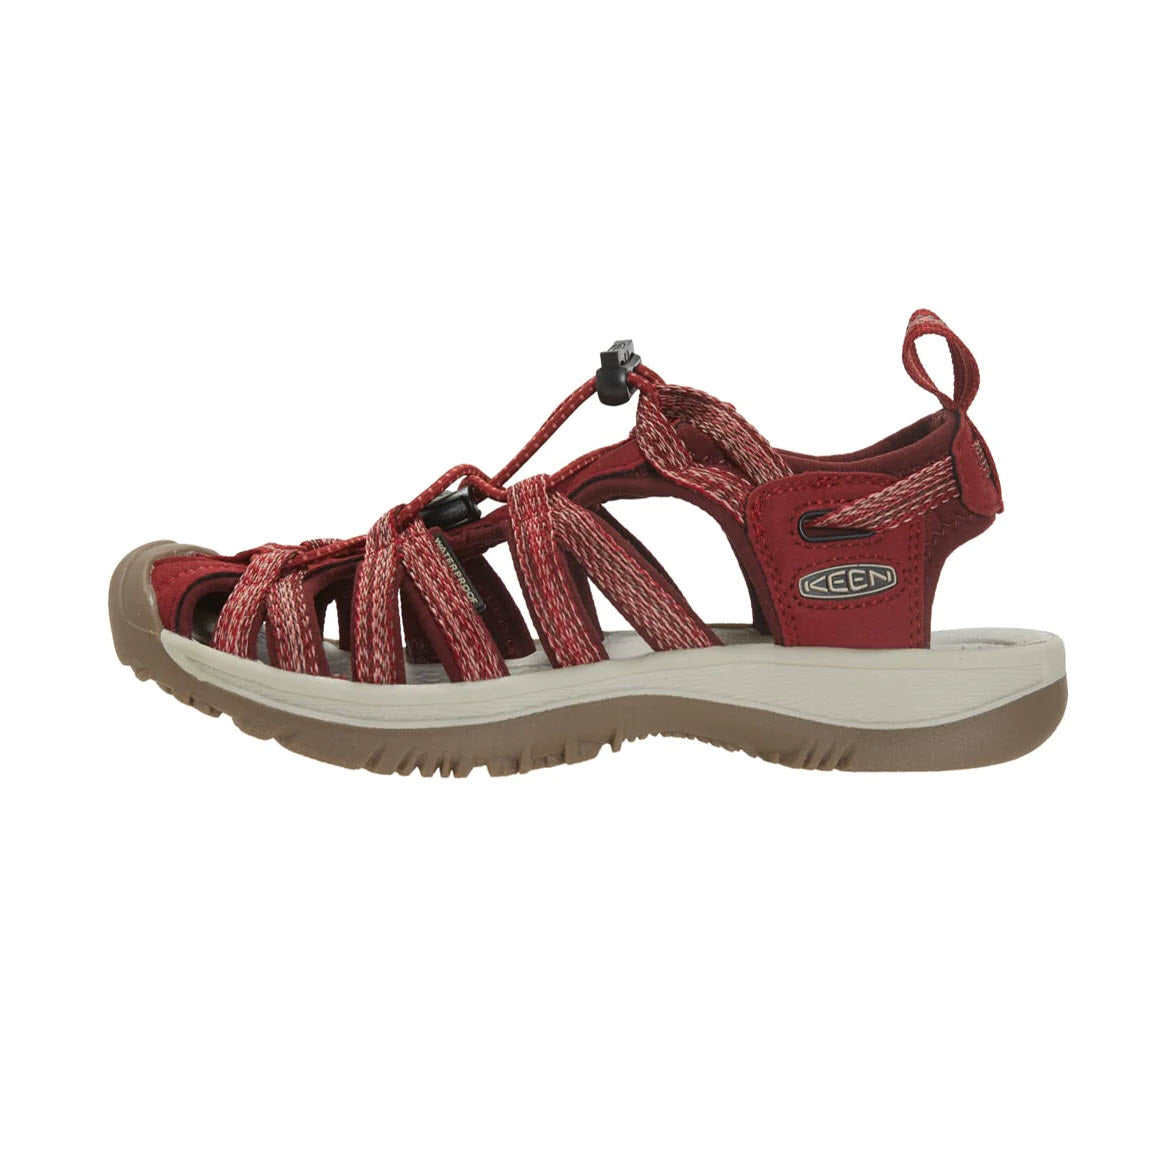 Keen Whisper Red Dahlia - Womens athletic sandal with adjustable straps and a women-specific fit, displayed on a white background.